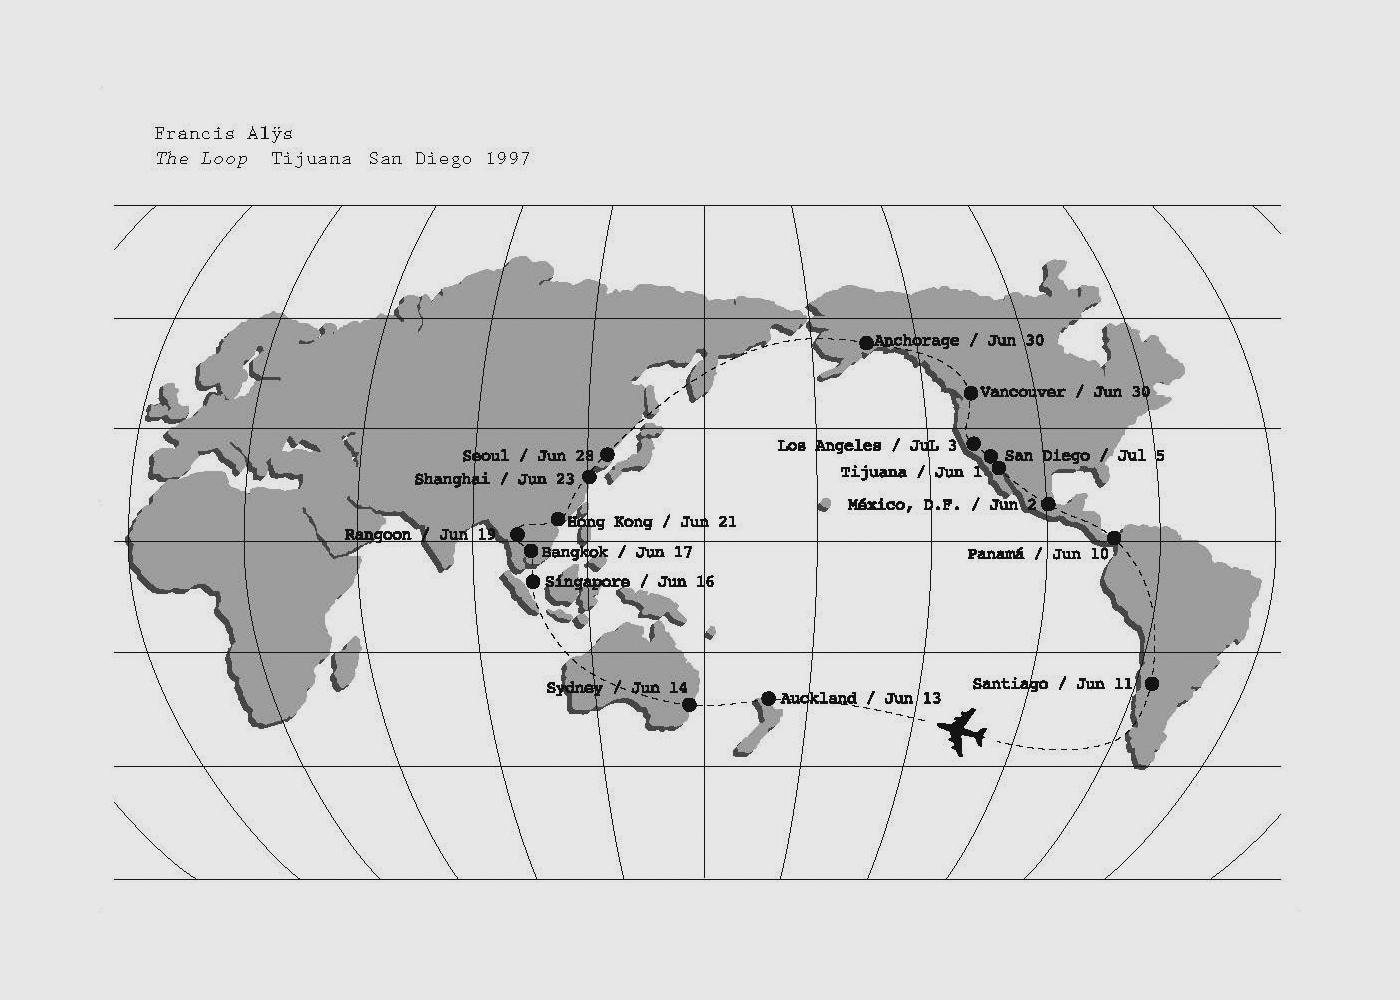 black and white map of the globe with a plane route depicted